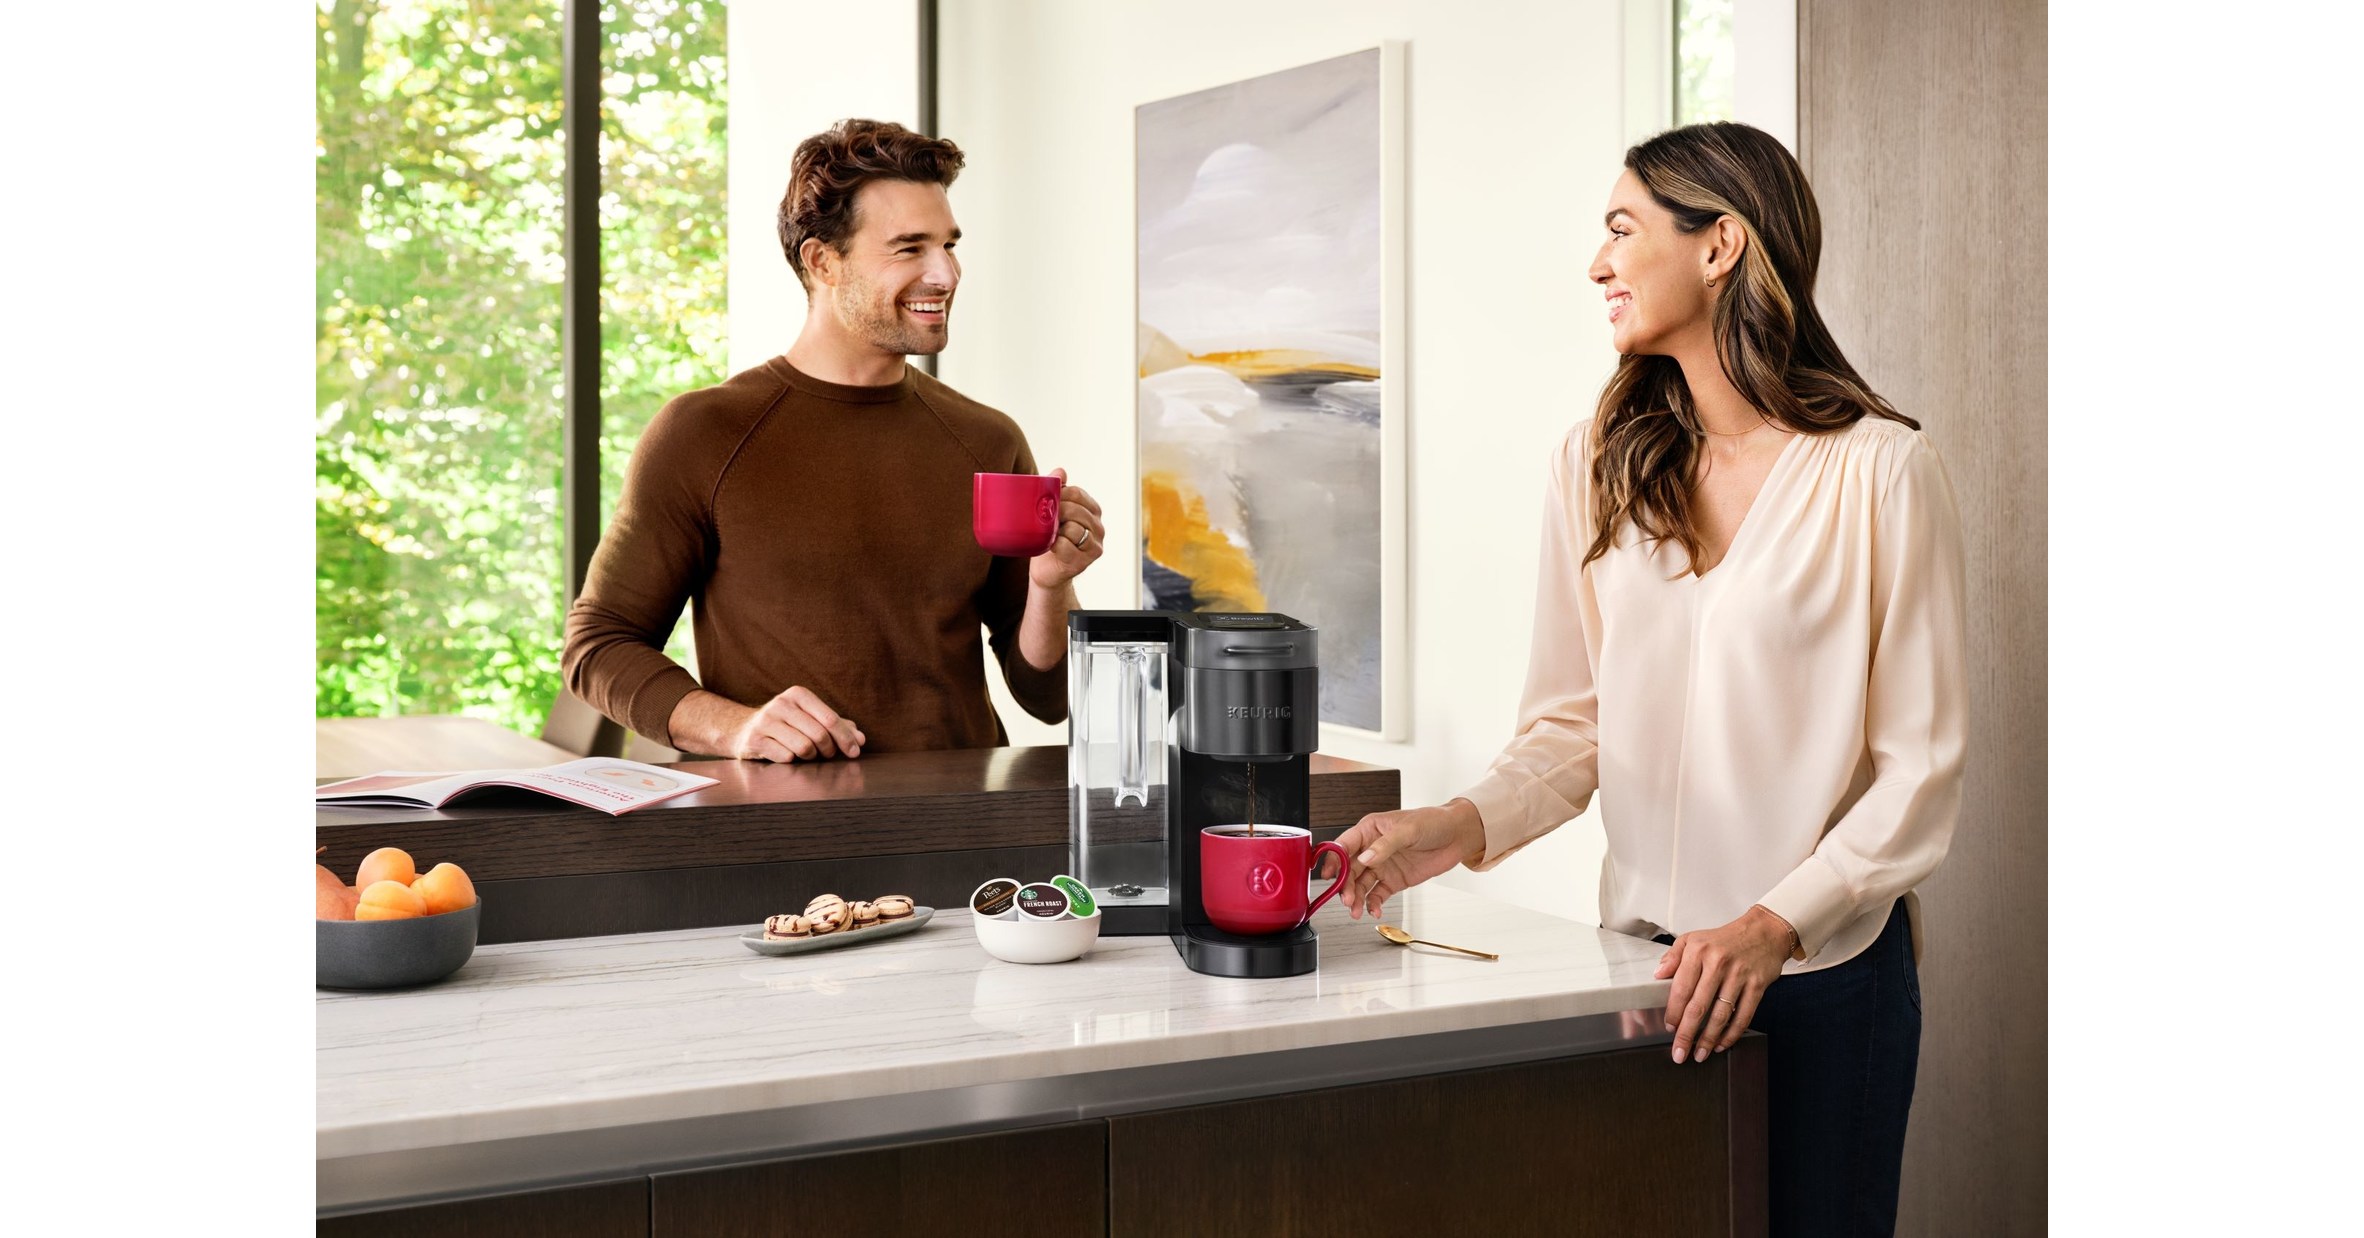 Keurig launches first Wi-Fi-enabled smart coffee maker